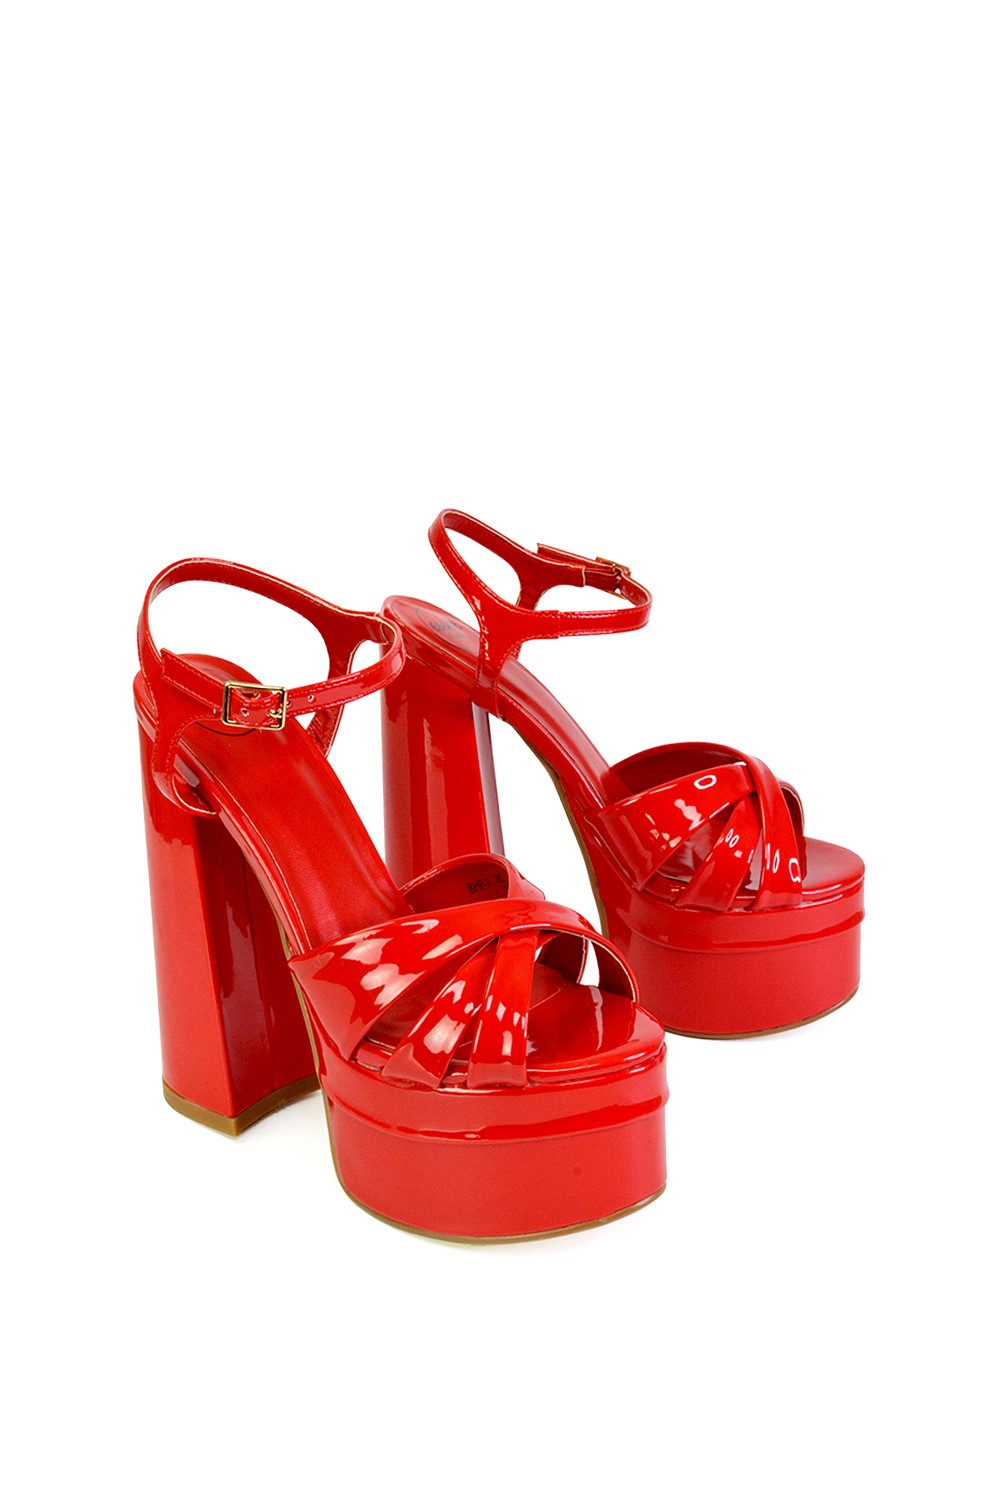 XY London Anya Strappy Chunky Super High Block Heel Platform Shoes in Red